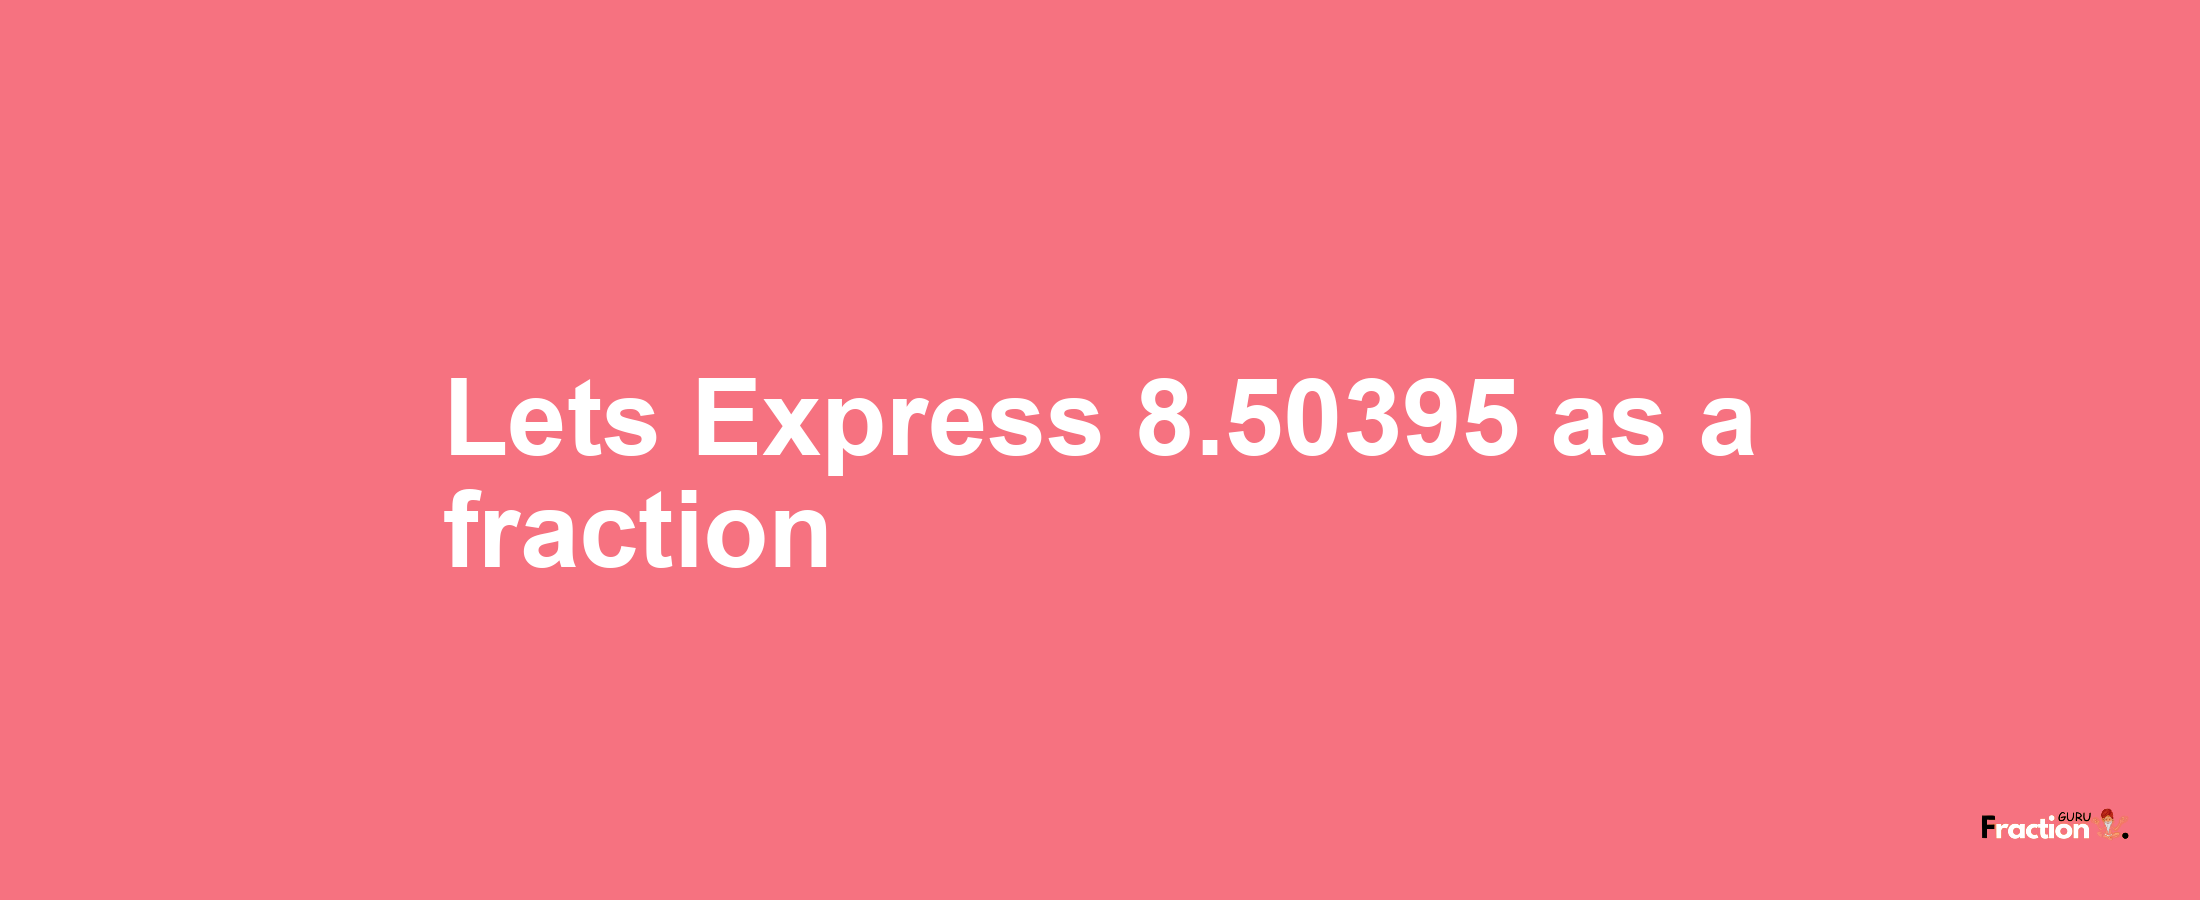 Lets Express 8.50395 as afraction